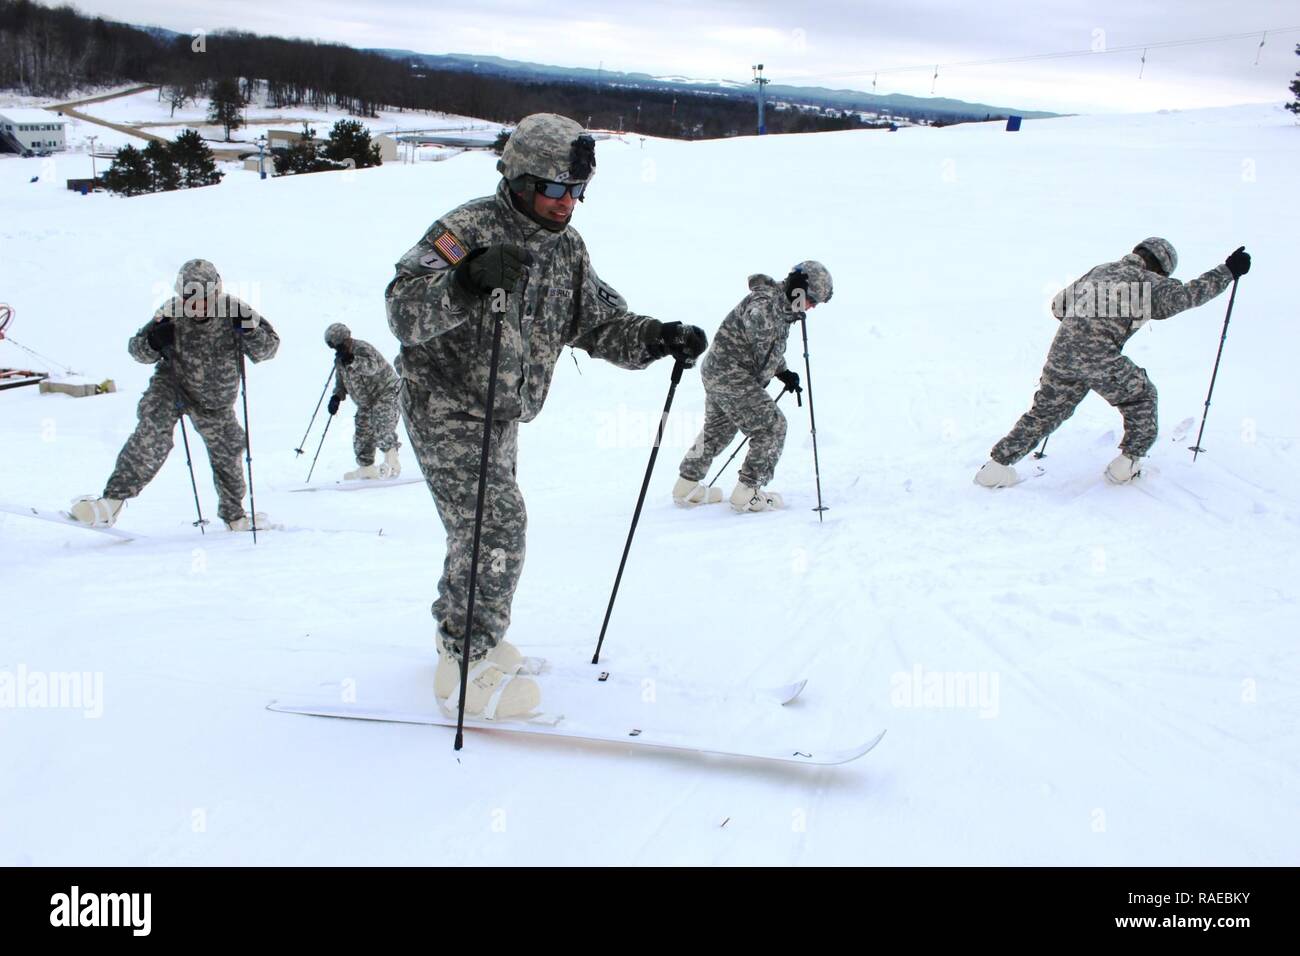 Soldiers with the 181st Multi-Functional Training Brigade participate in a skiing training session Jan. 27, 2017, at Whitetail Ridge Ski Area as part of the Cold-Weather Operations Course at Fort McCoy. The Cold-Weather Operations Course is the first of its kind coordinated by the Directorate of Plans, Mobilization, Training and Security, or DPTMS. It included participation by 11 Soldiers with the 181st and is taught by two instructors contracted to support DPTMS. Stock Photo